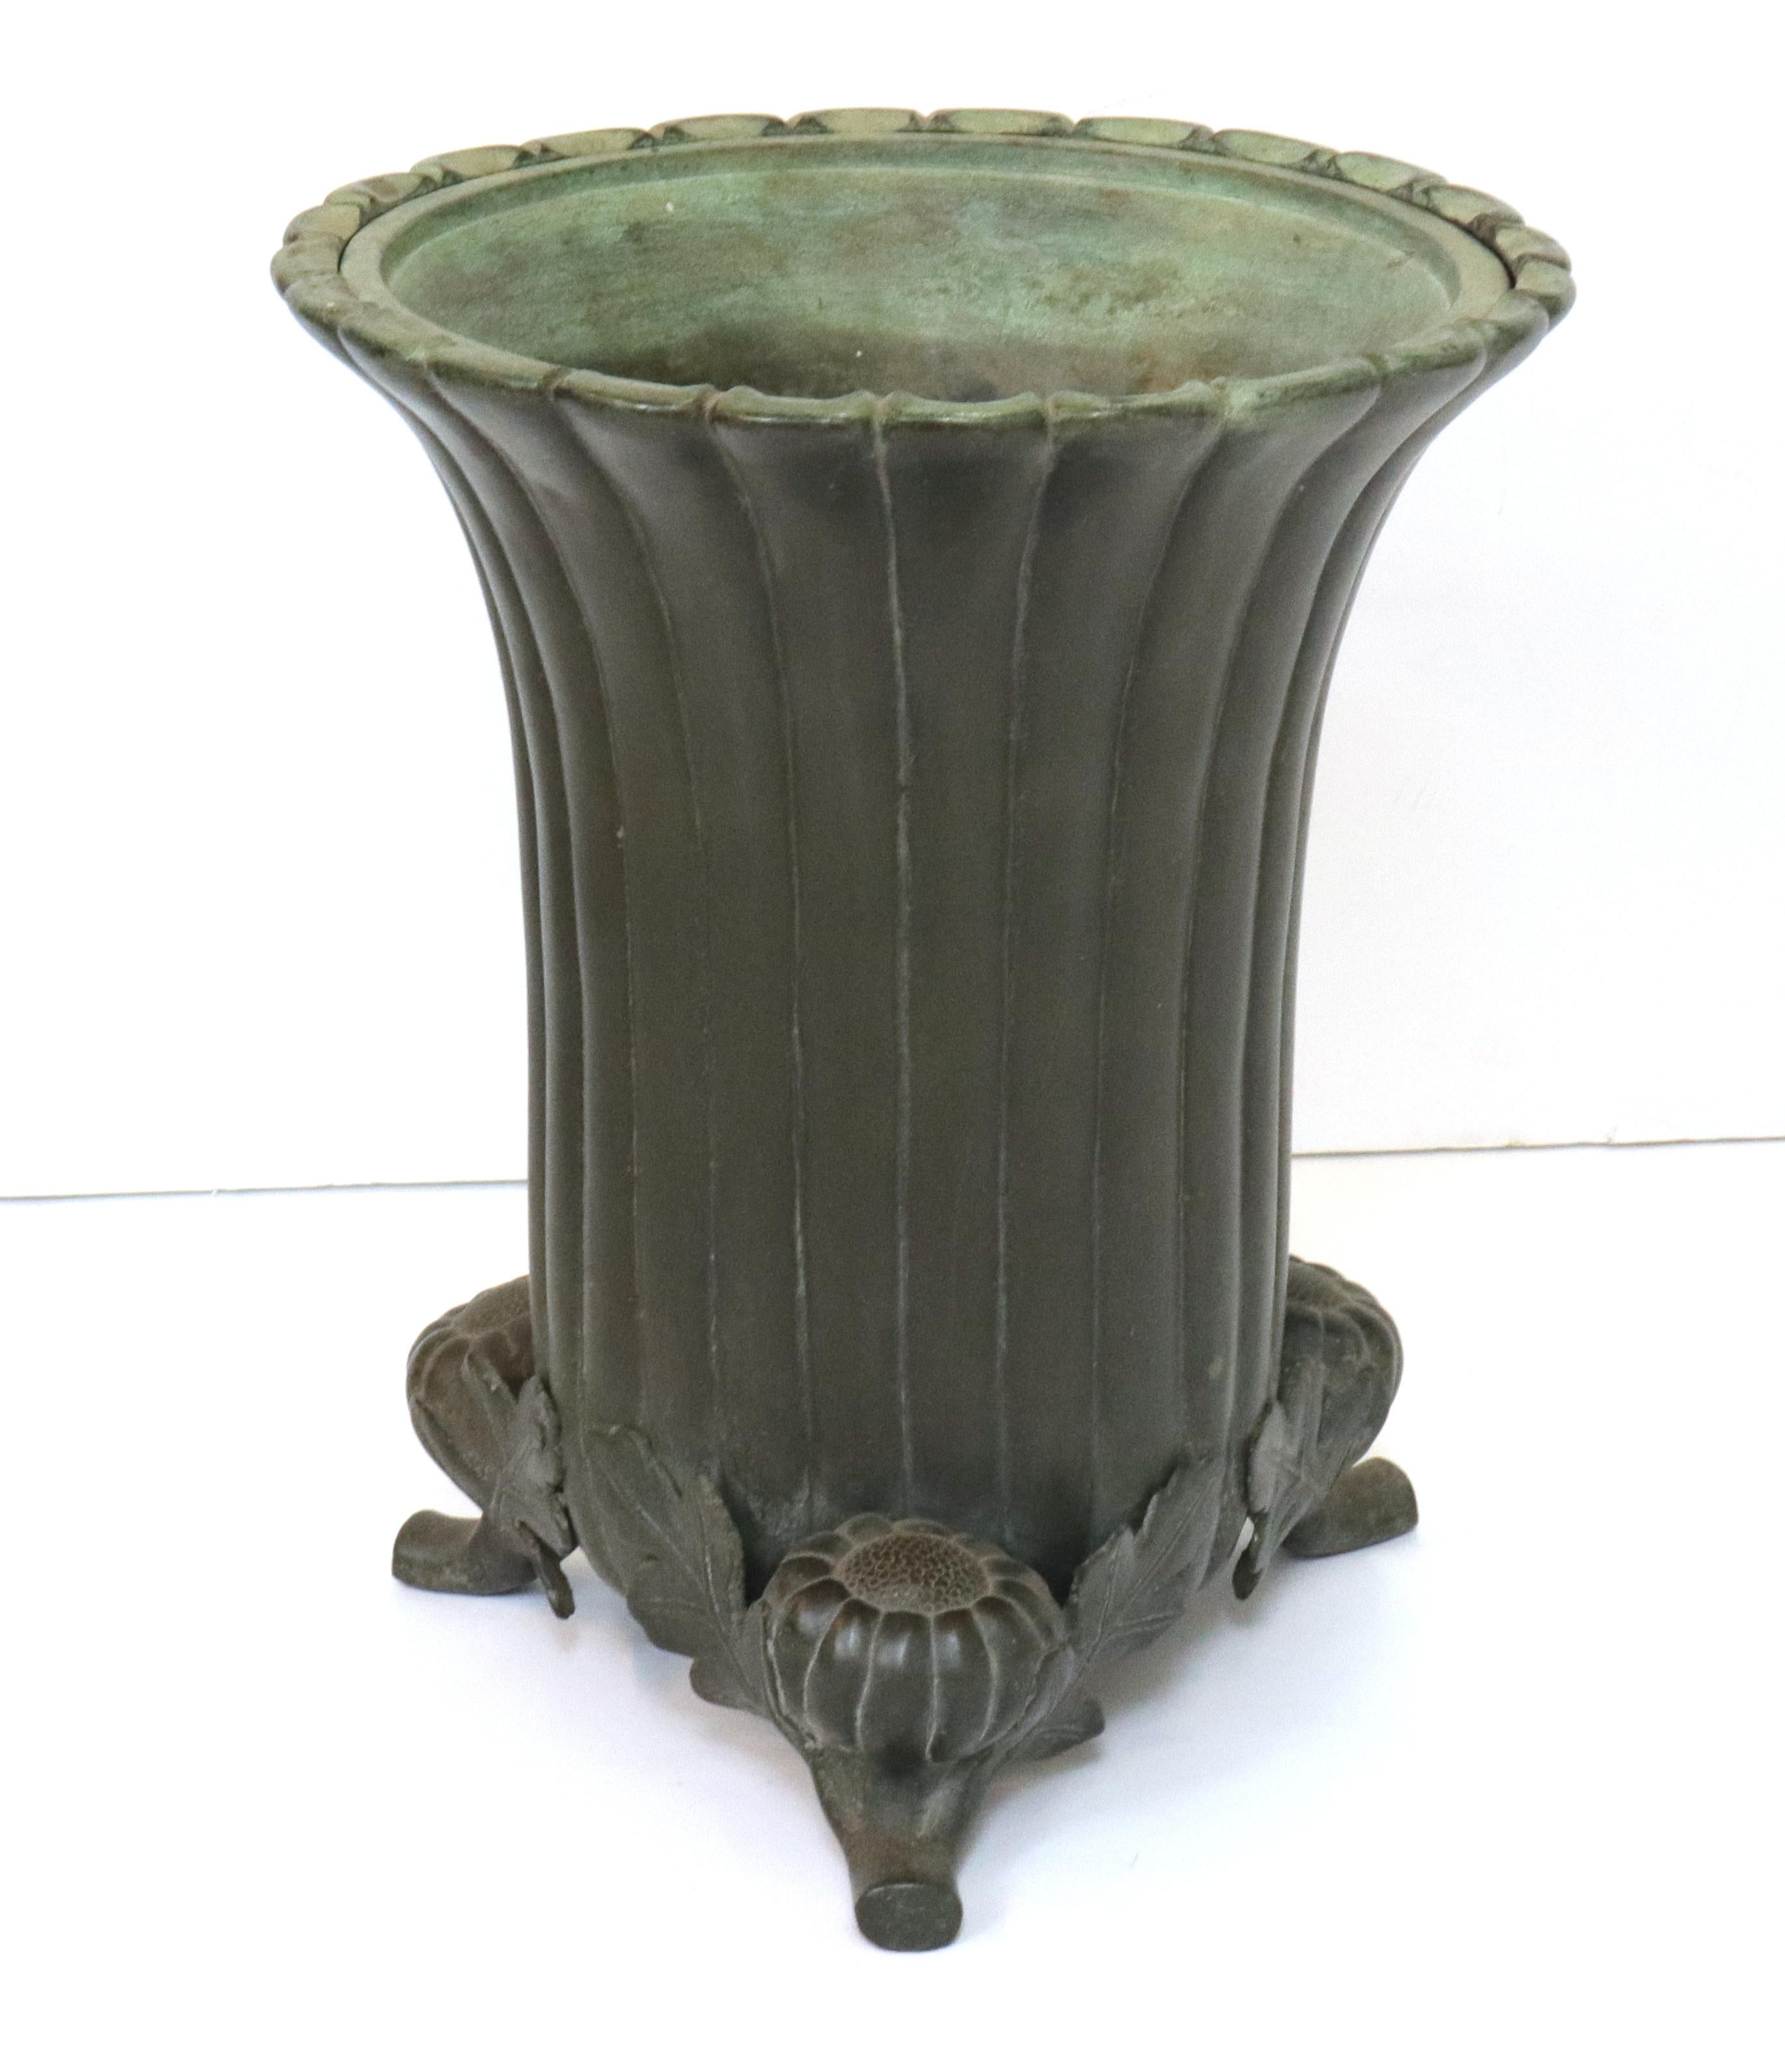 Japanese Meiji period ikebana vessel made in bronze with a decorative tripod base featuring Chrysanthemum blossoms on stems. The piece has a channeled green patina and was likely made during the late 19th century.
In great antique condition with